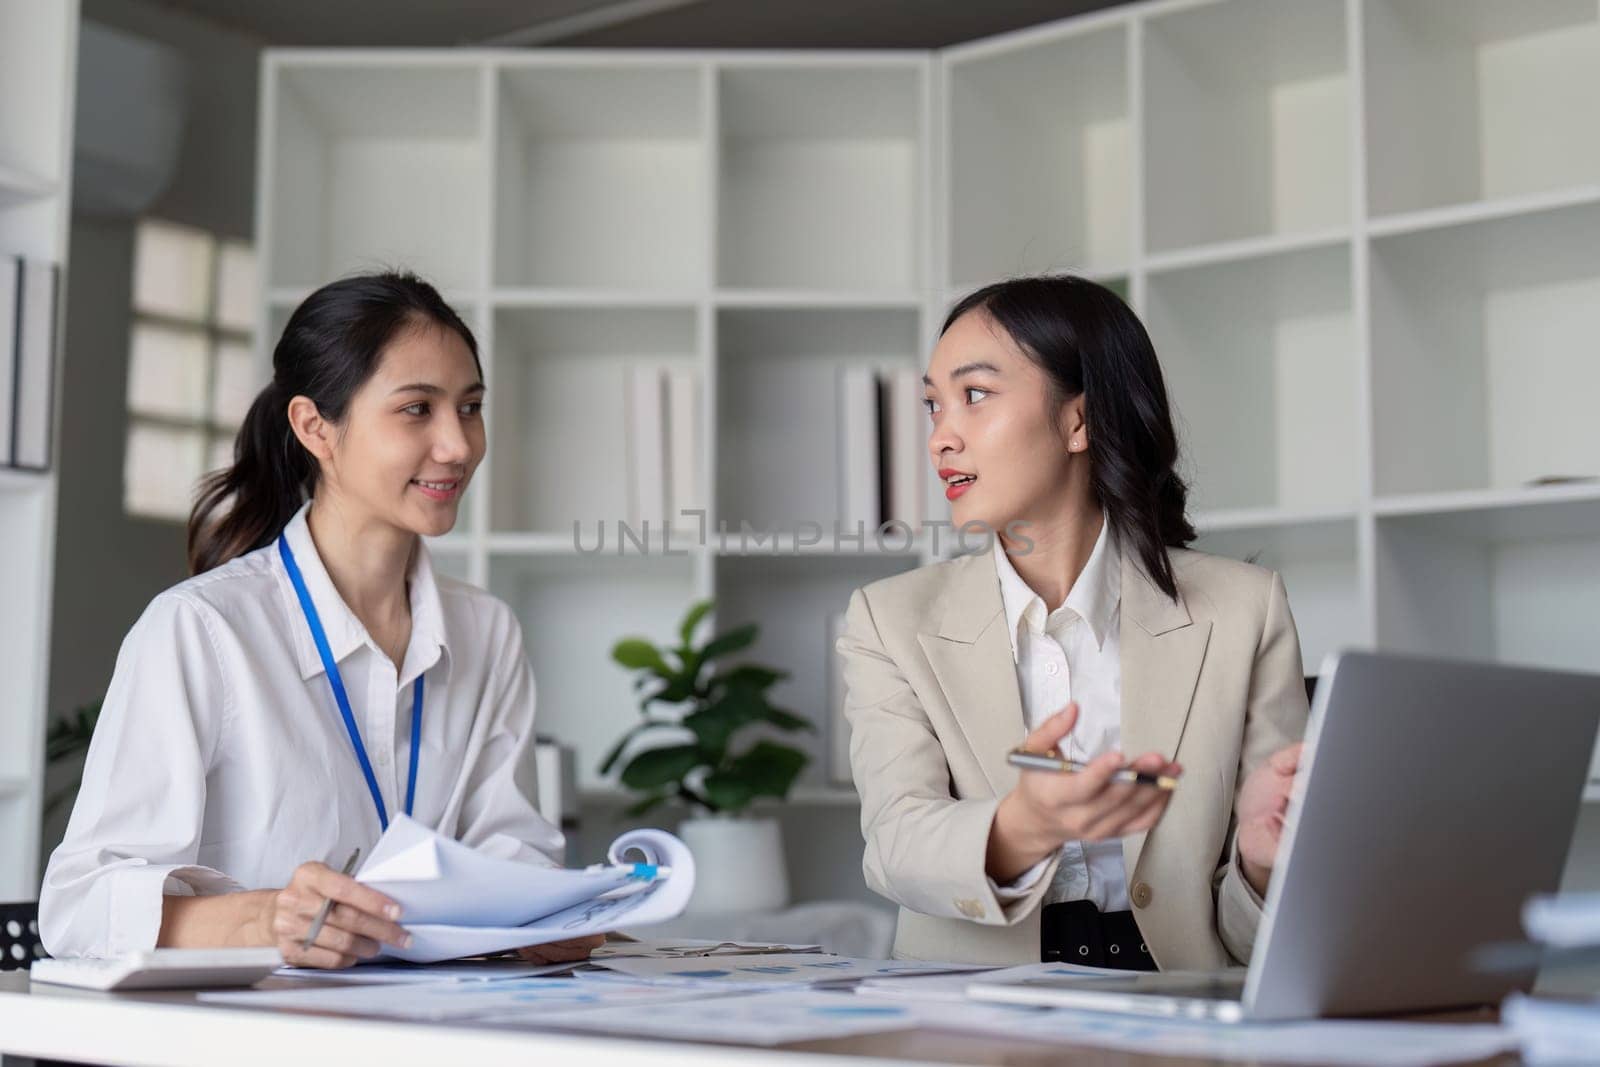 Two businesswomen engaged in teamwork, planning, and analysis discussion in a modern office environment.